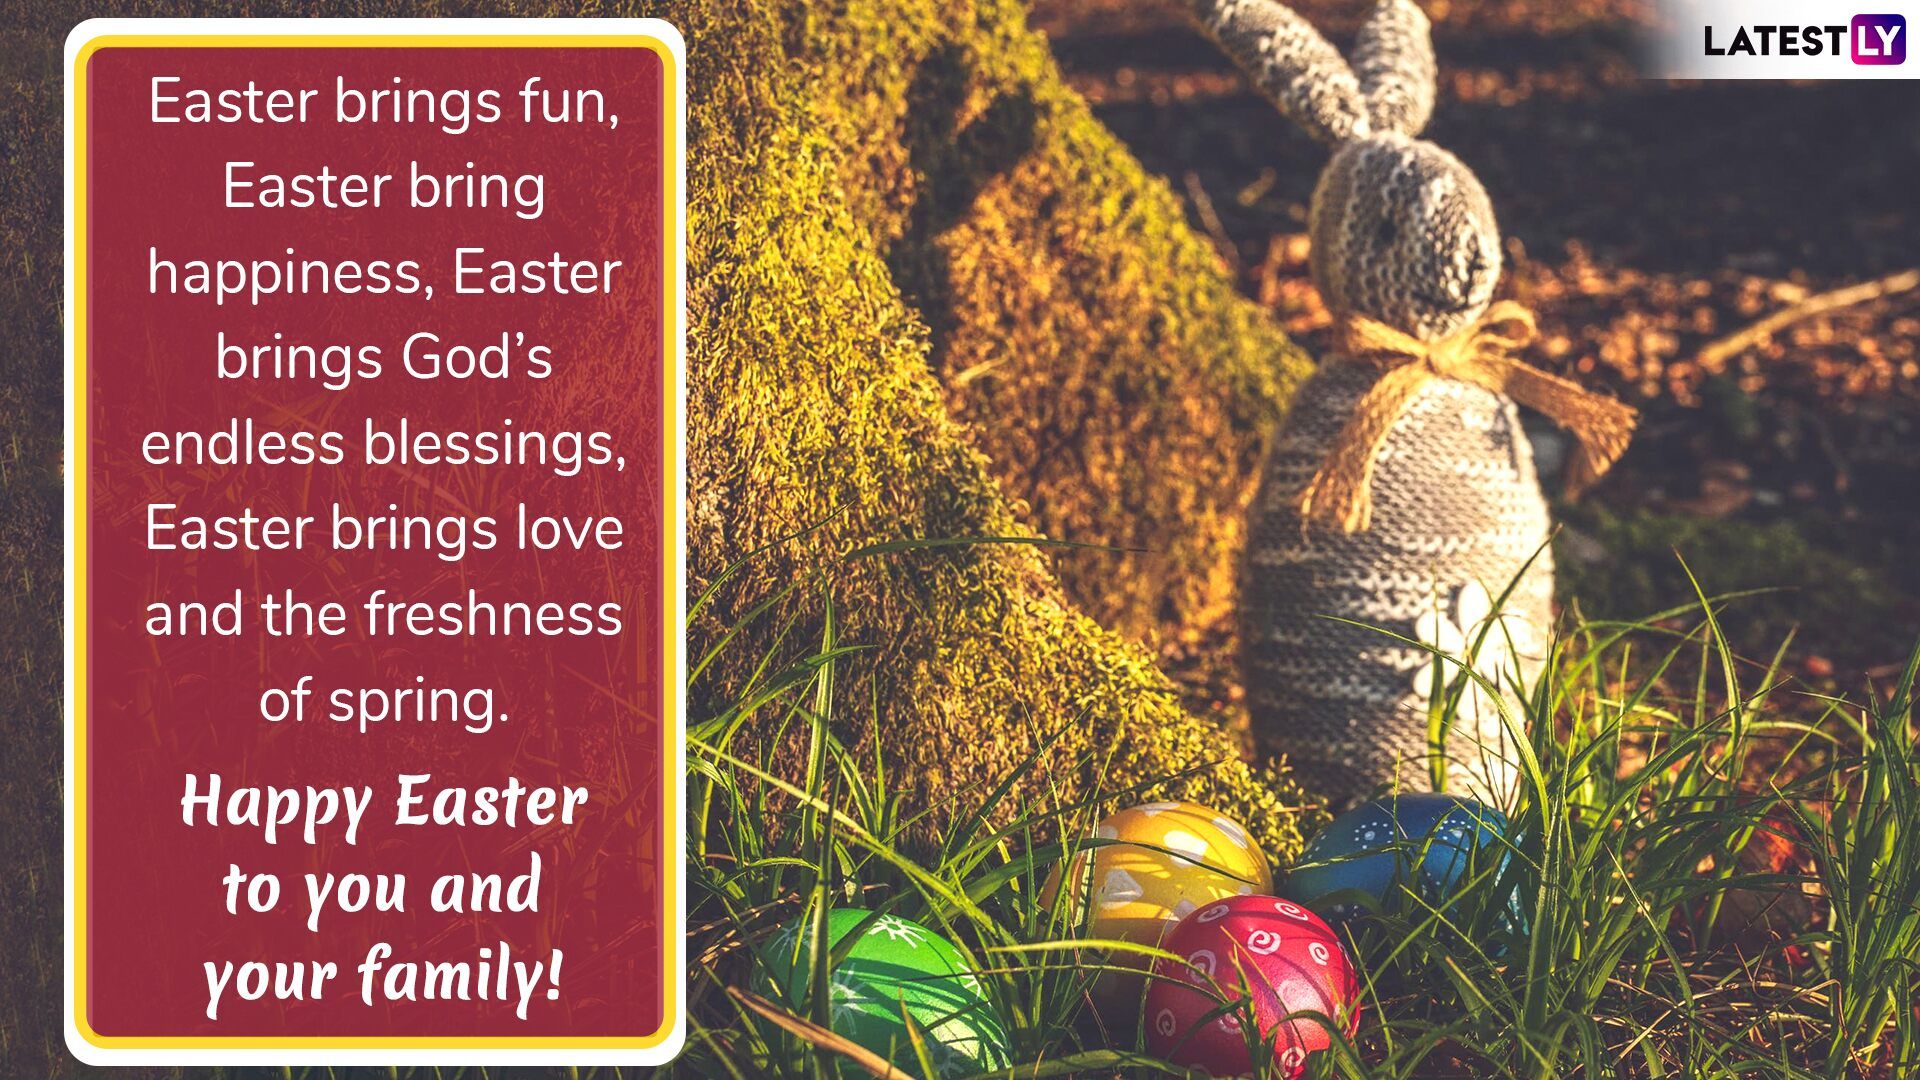 Happy Easter Sunday 2019 Wishes and Messages: Best WhatsApp